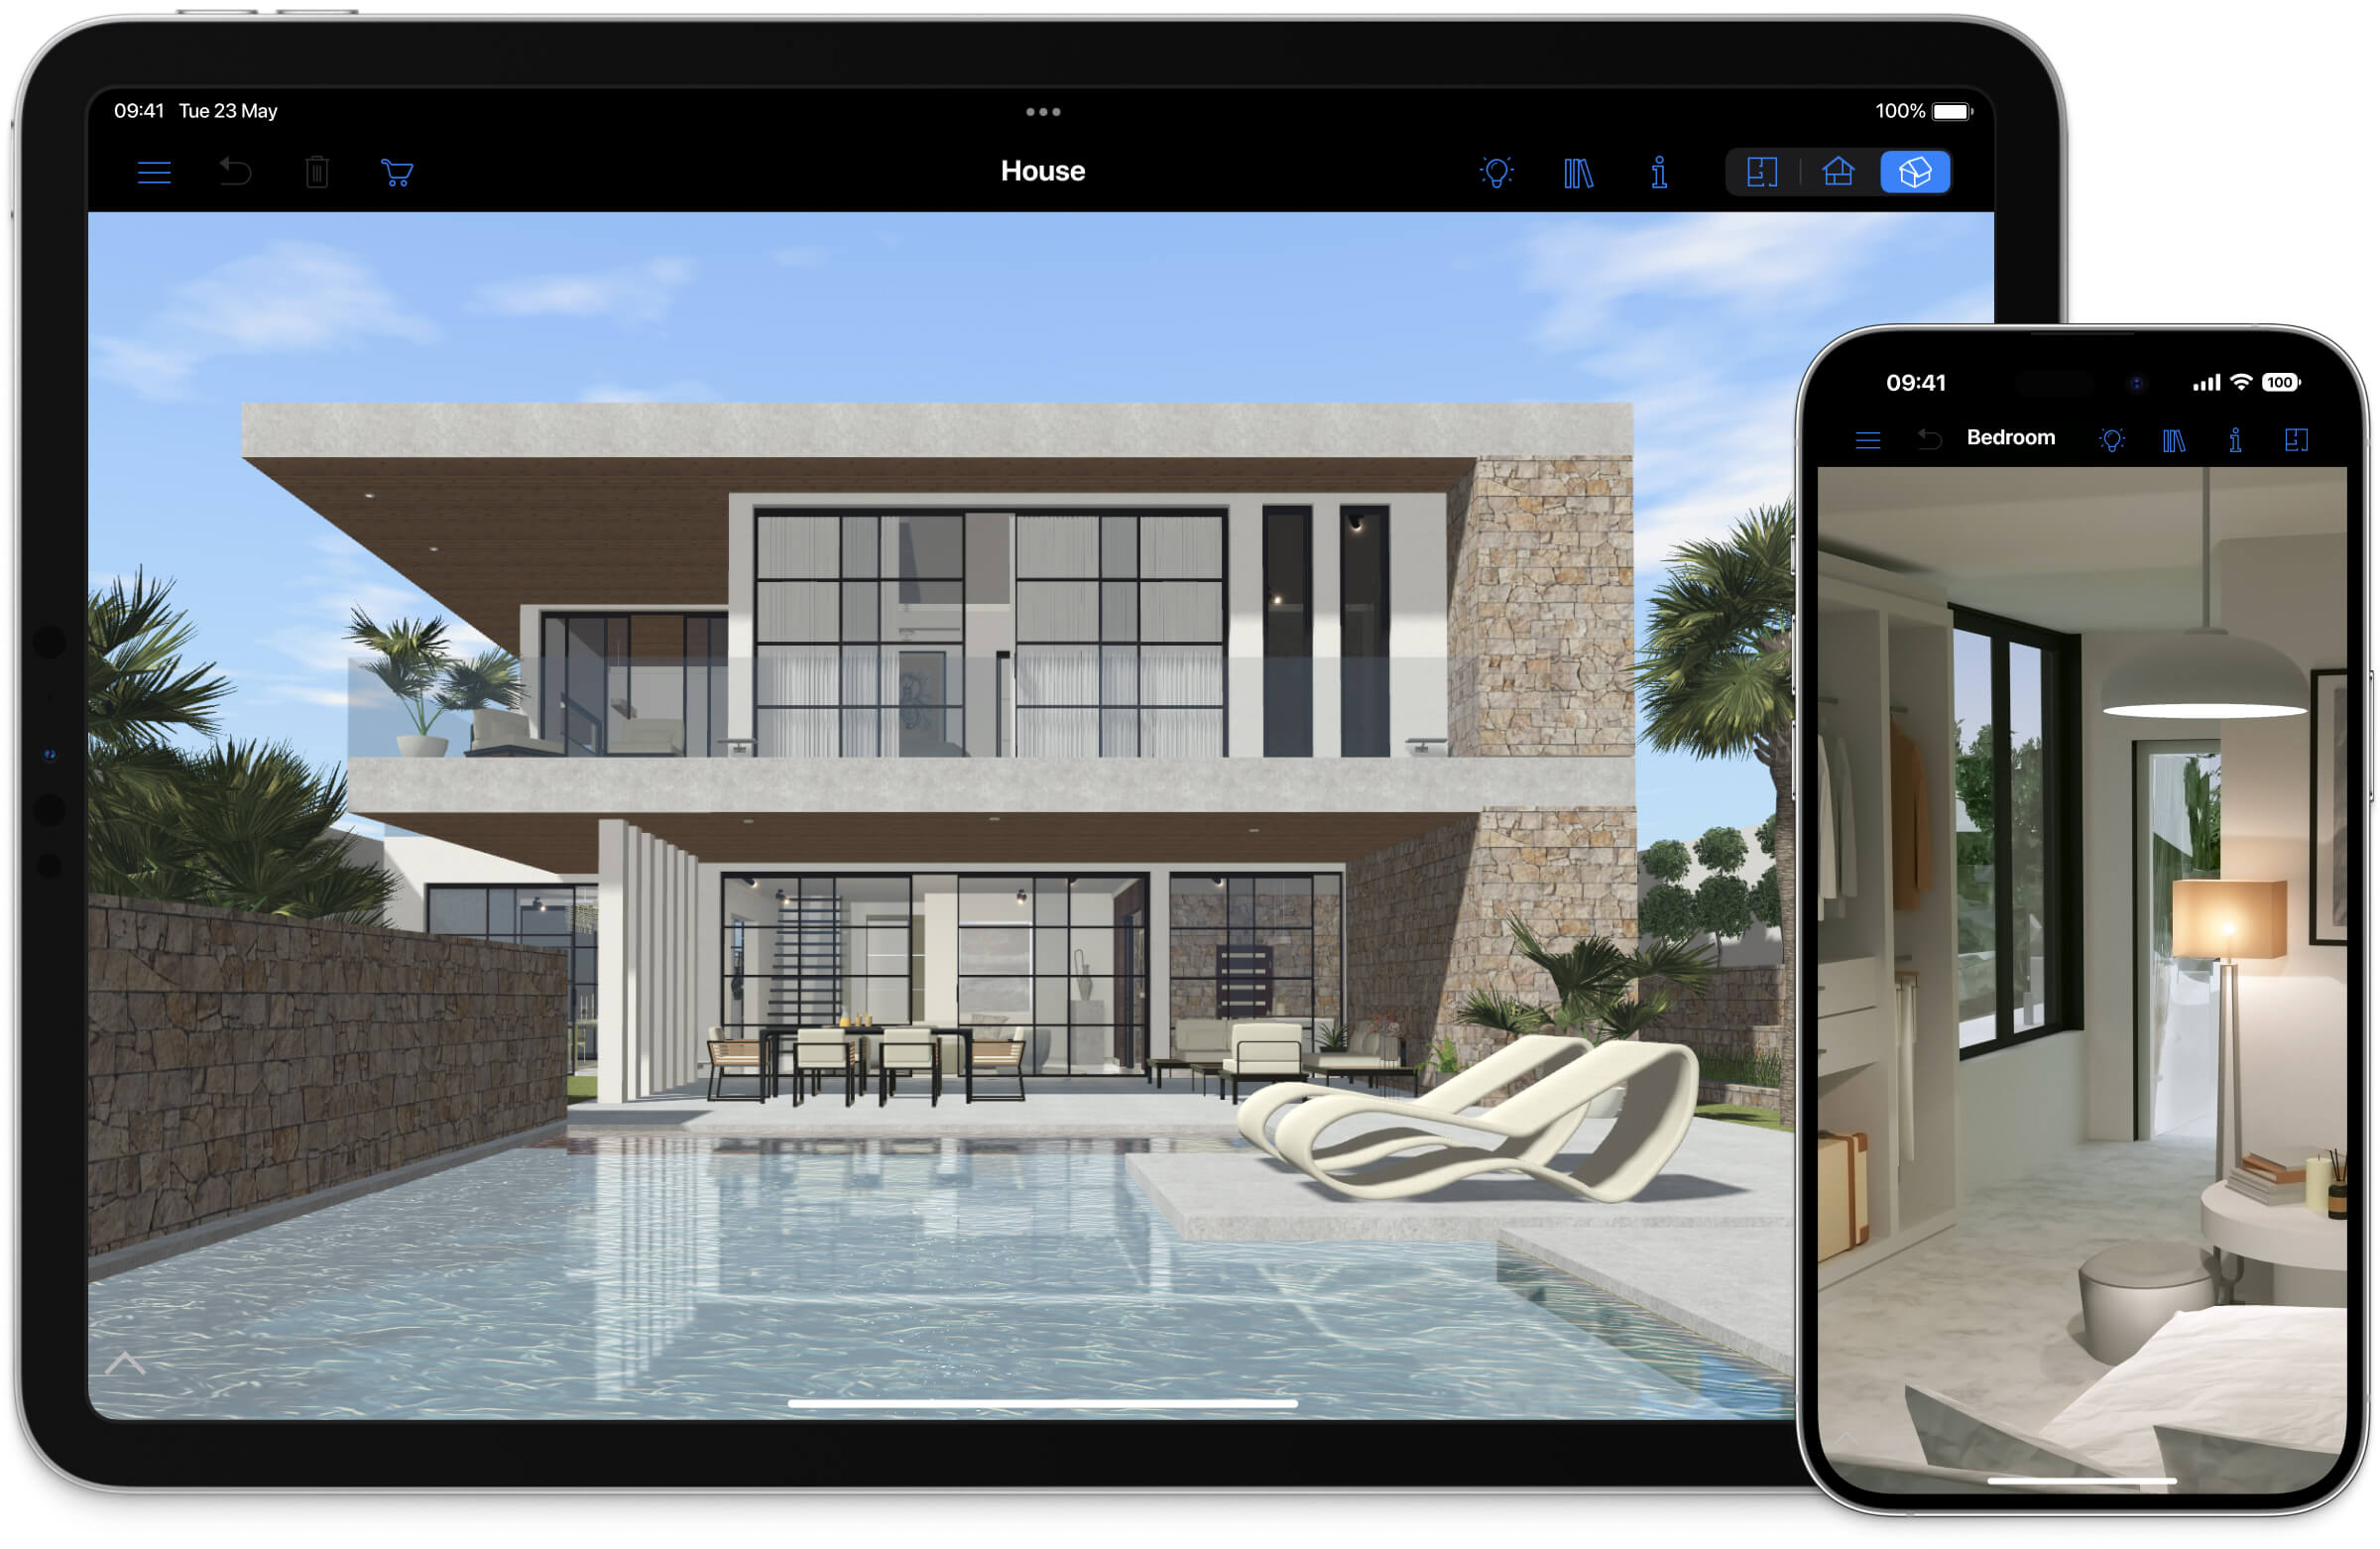 House exterior and interior designed and opened in Live Home 3D for iPad and iPhone.